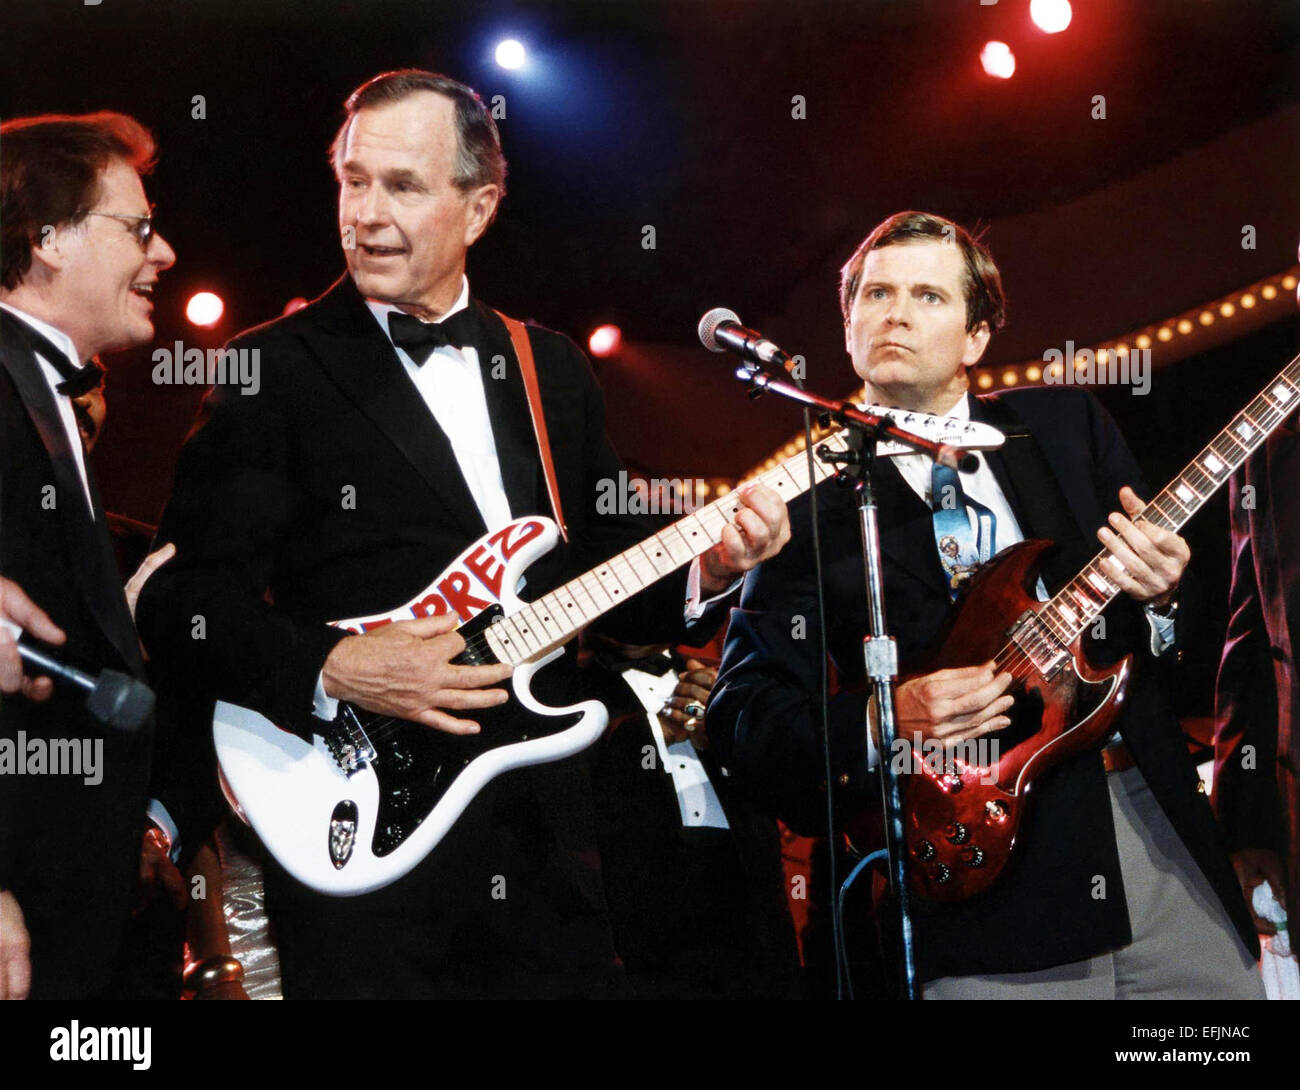 US President George H.W. Bush and political advisor Lee Atwater play the guitar at the Celebration for Young Americans, part of the inaugural celebration in the DC Armory January 21, 1989 in Washington, DC. Stock Photo